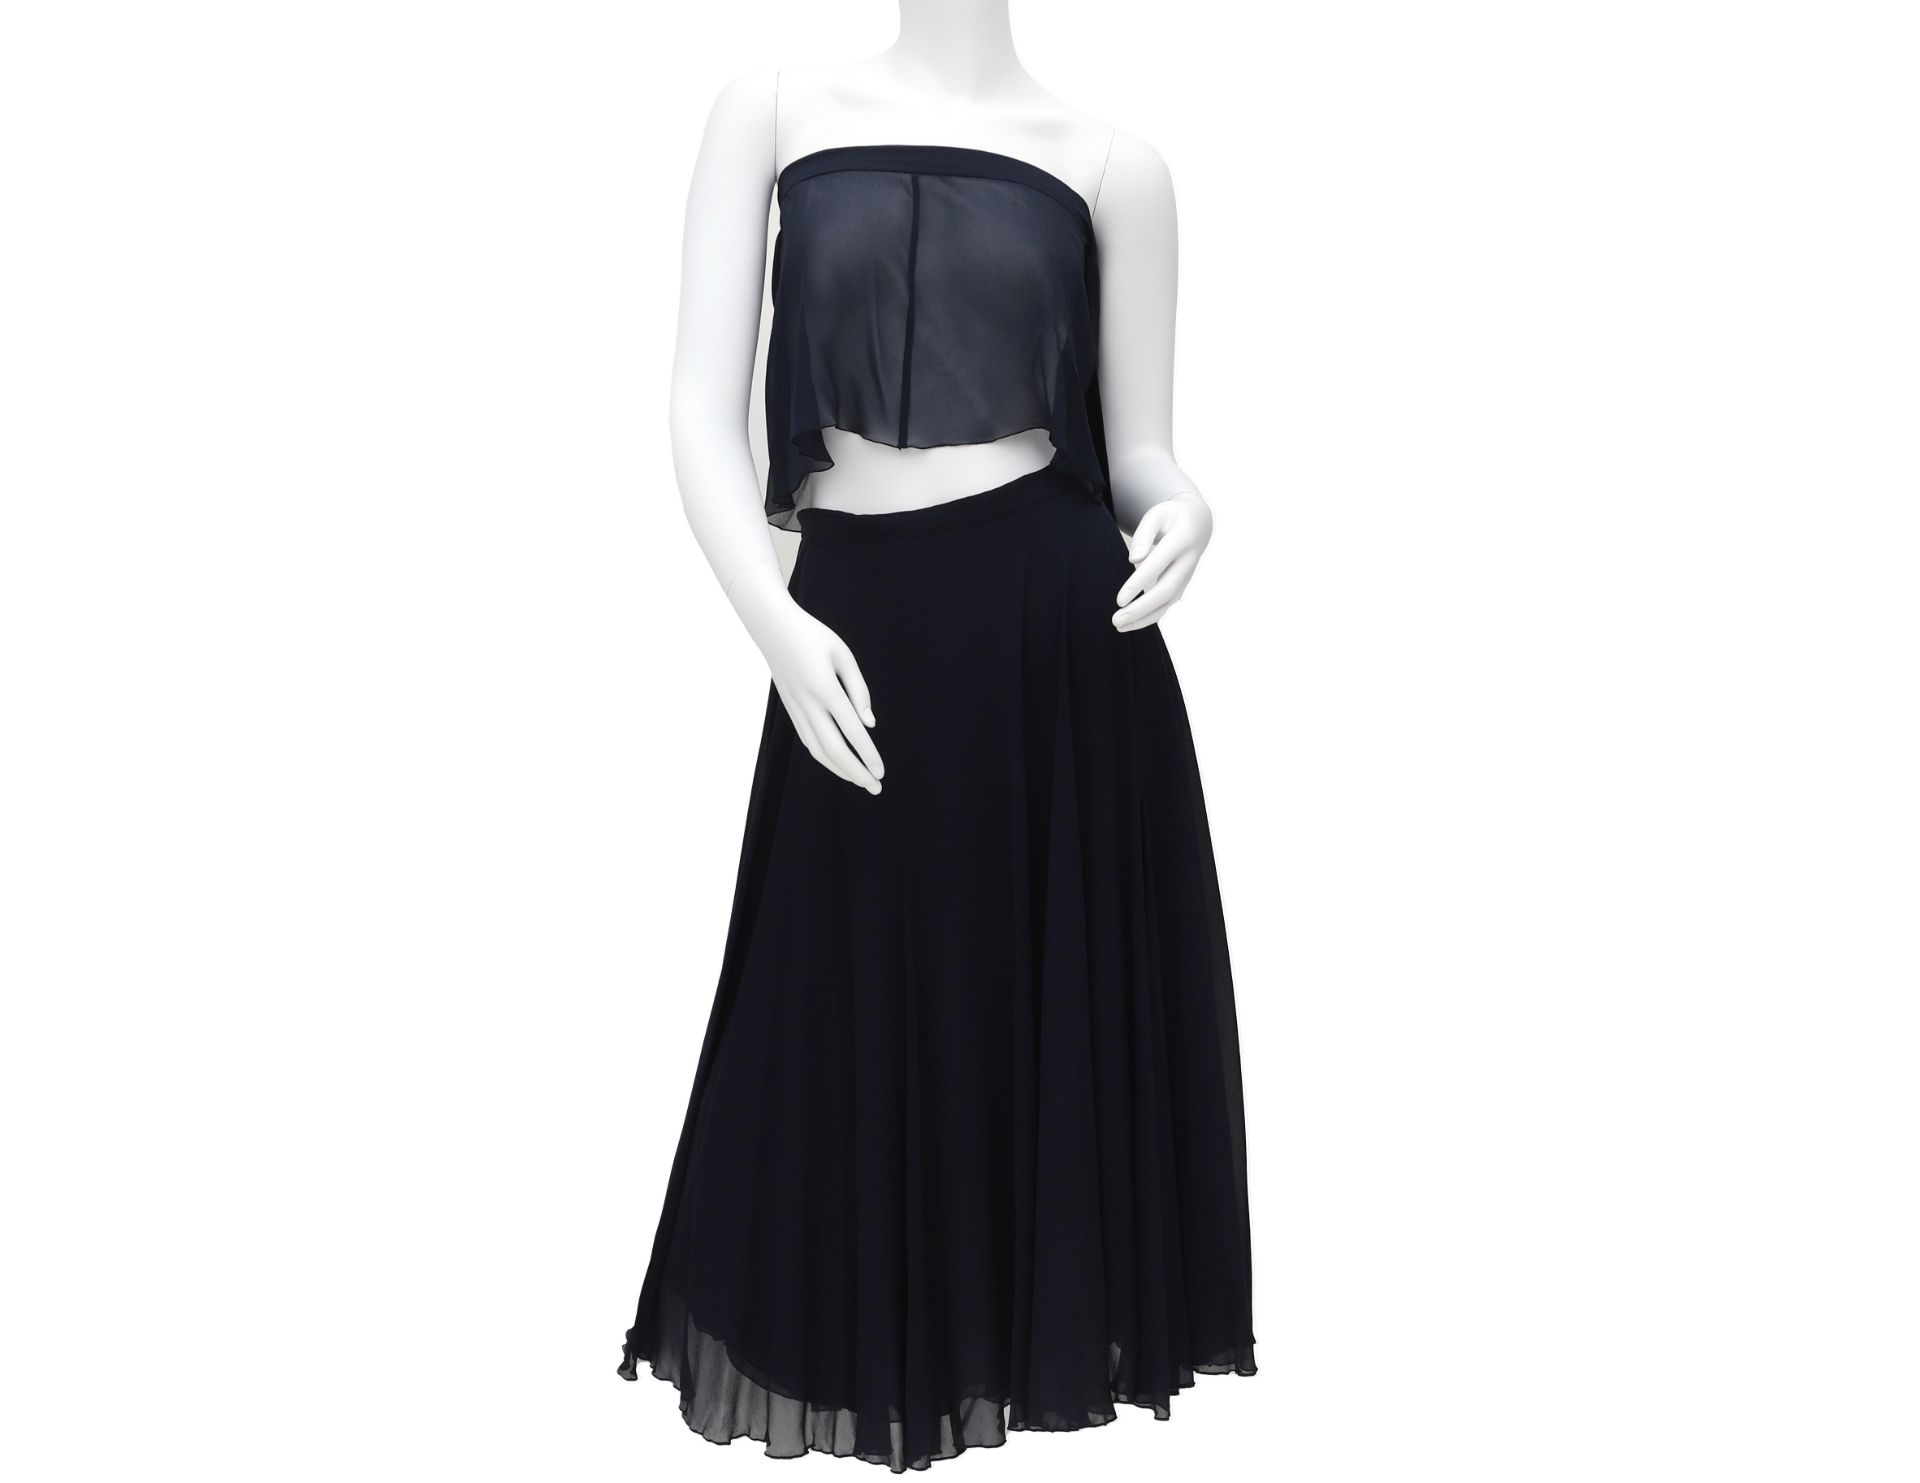 A Chanel Boutique navy blue ensemble with a bandeau top and long skirt. The skirt is a classic a-